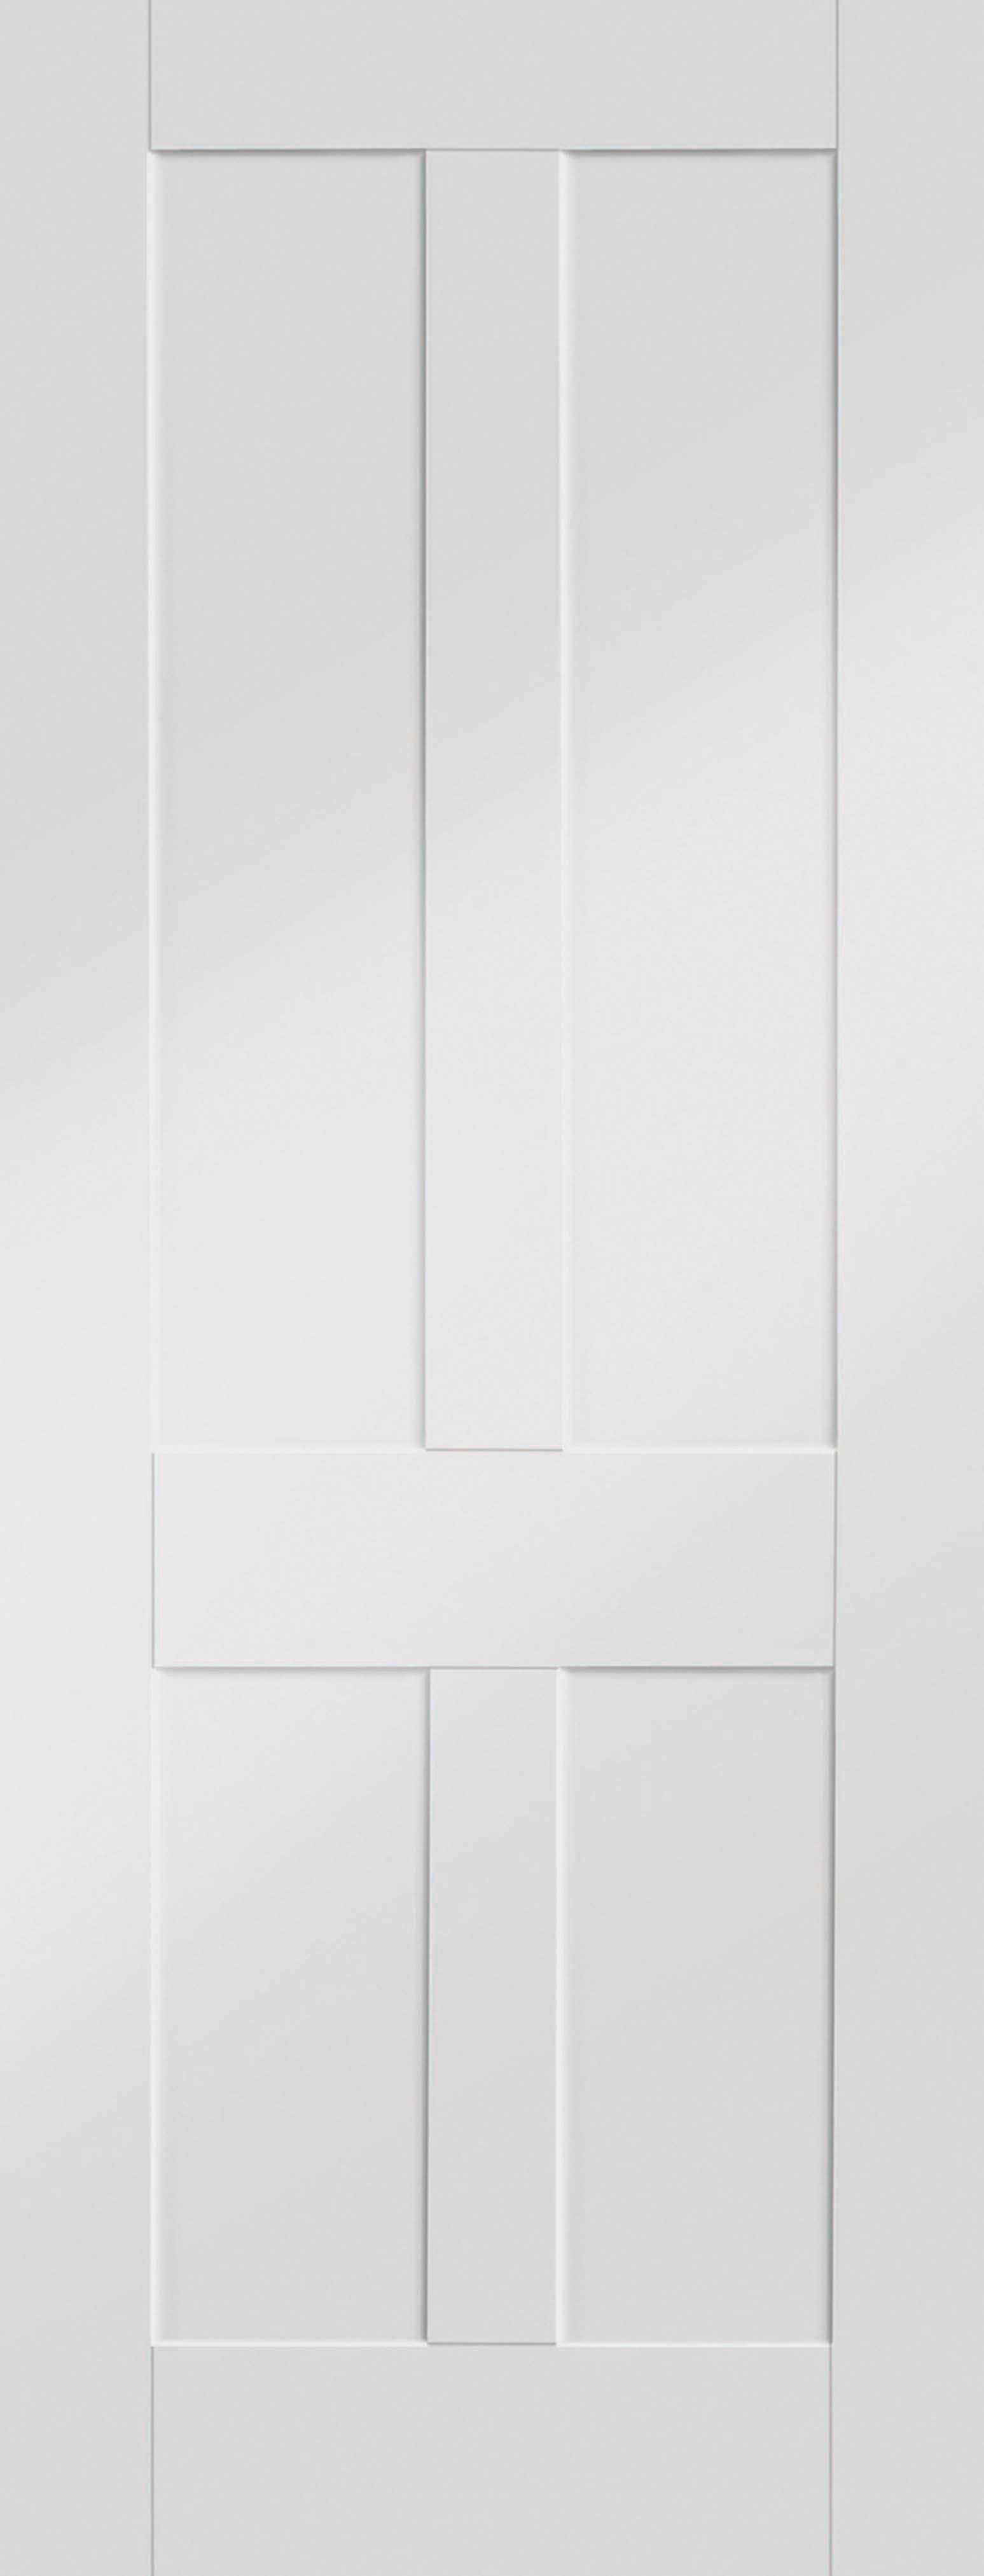 Image of XL Joinery Victorian/Malton White Softwood 4 Panel Internal Door - 1981 x 838mm